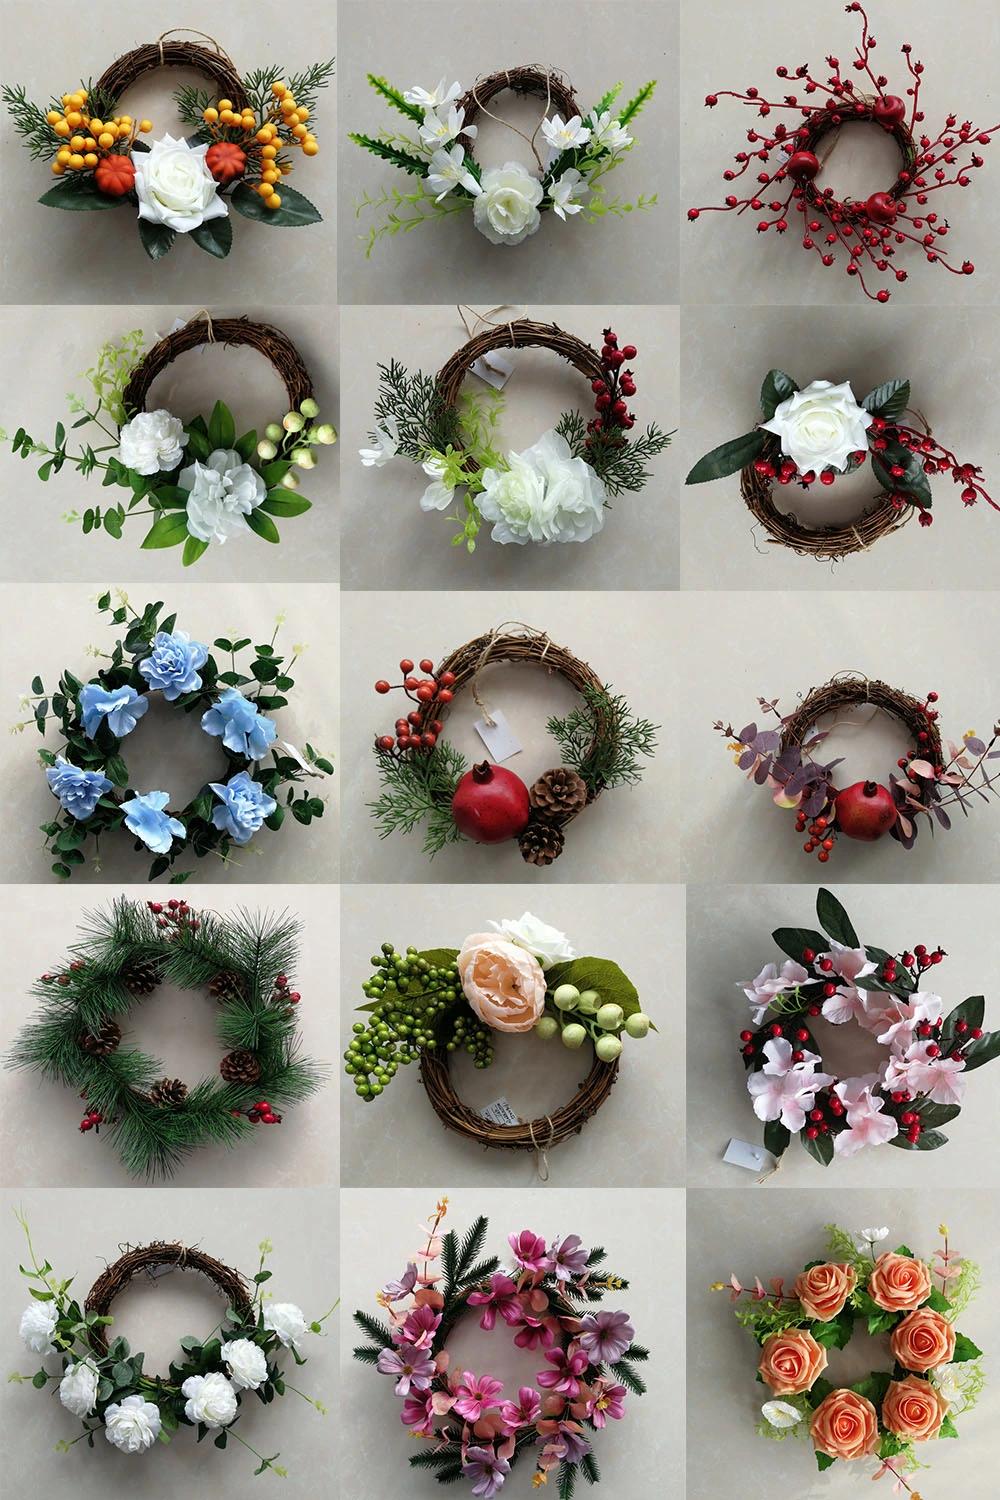 Wholesale Personalized Natural Wooden New Design Christmas Decorative Wreath